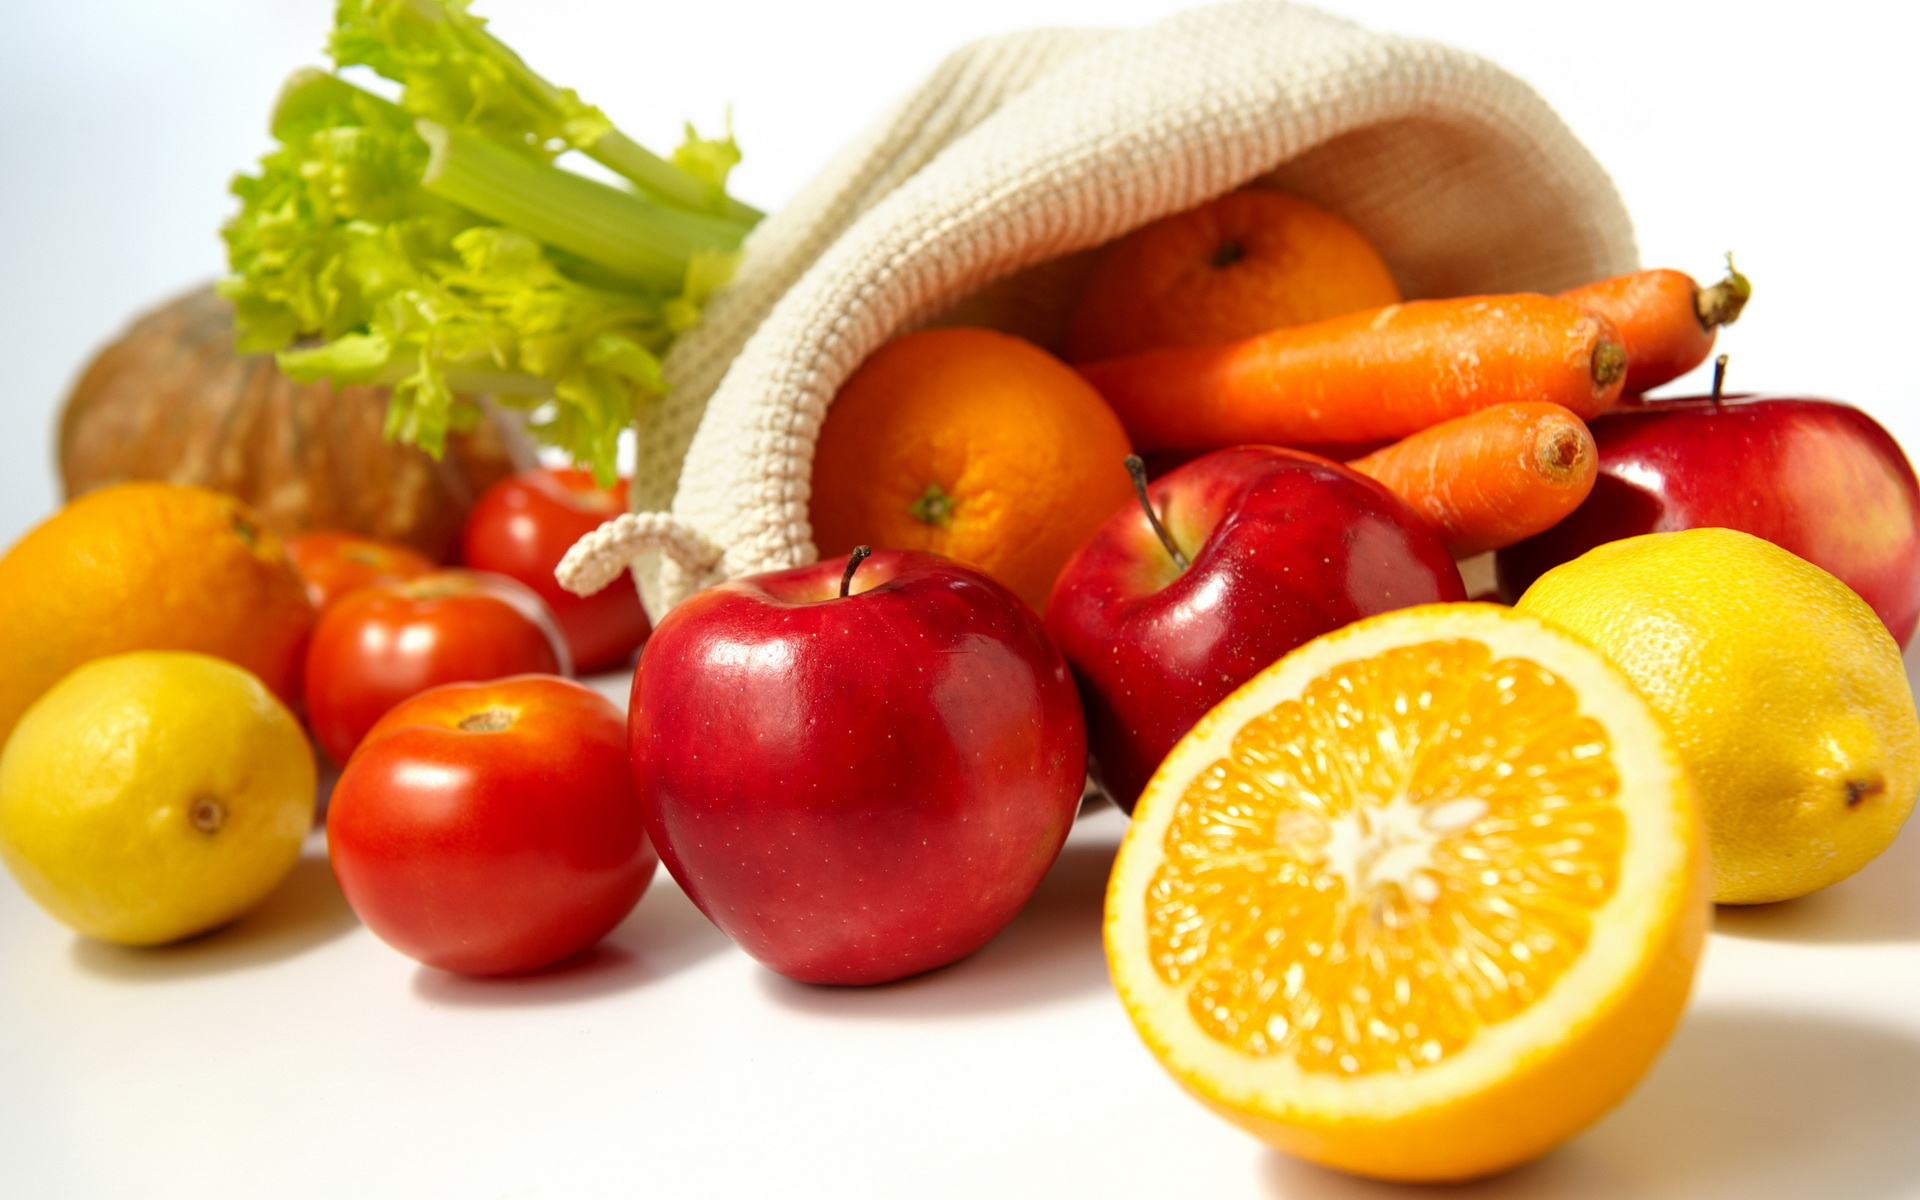 Fruits And Vegetables Wallpaper Image Pictures